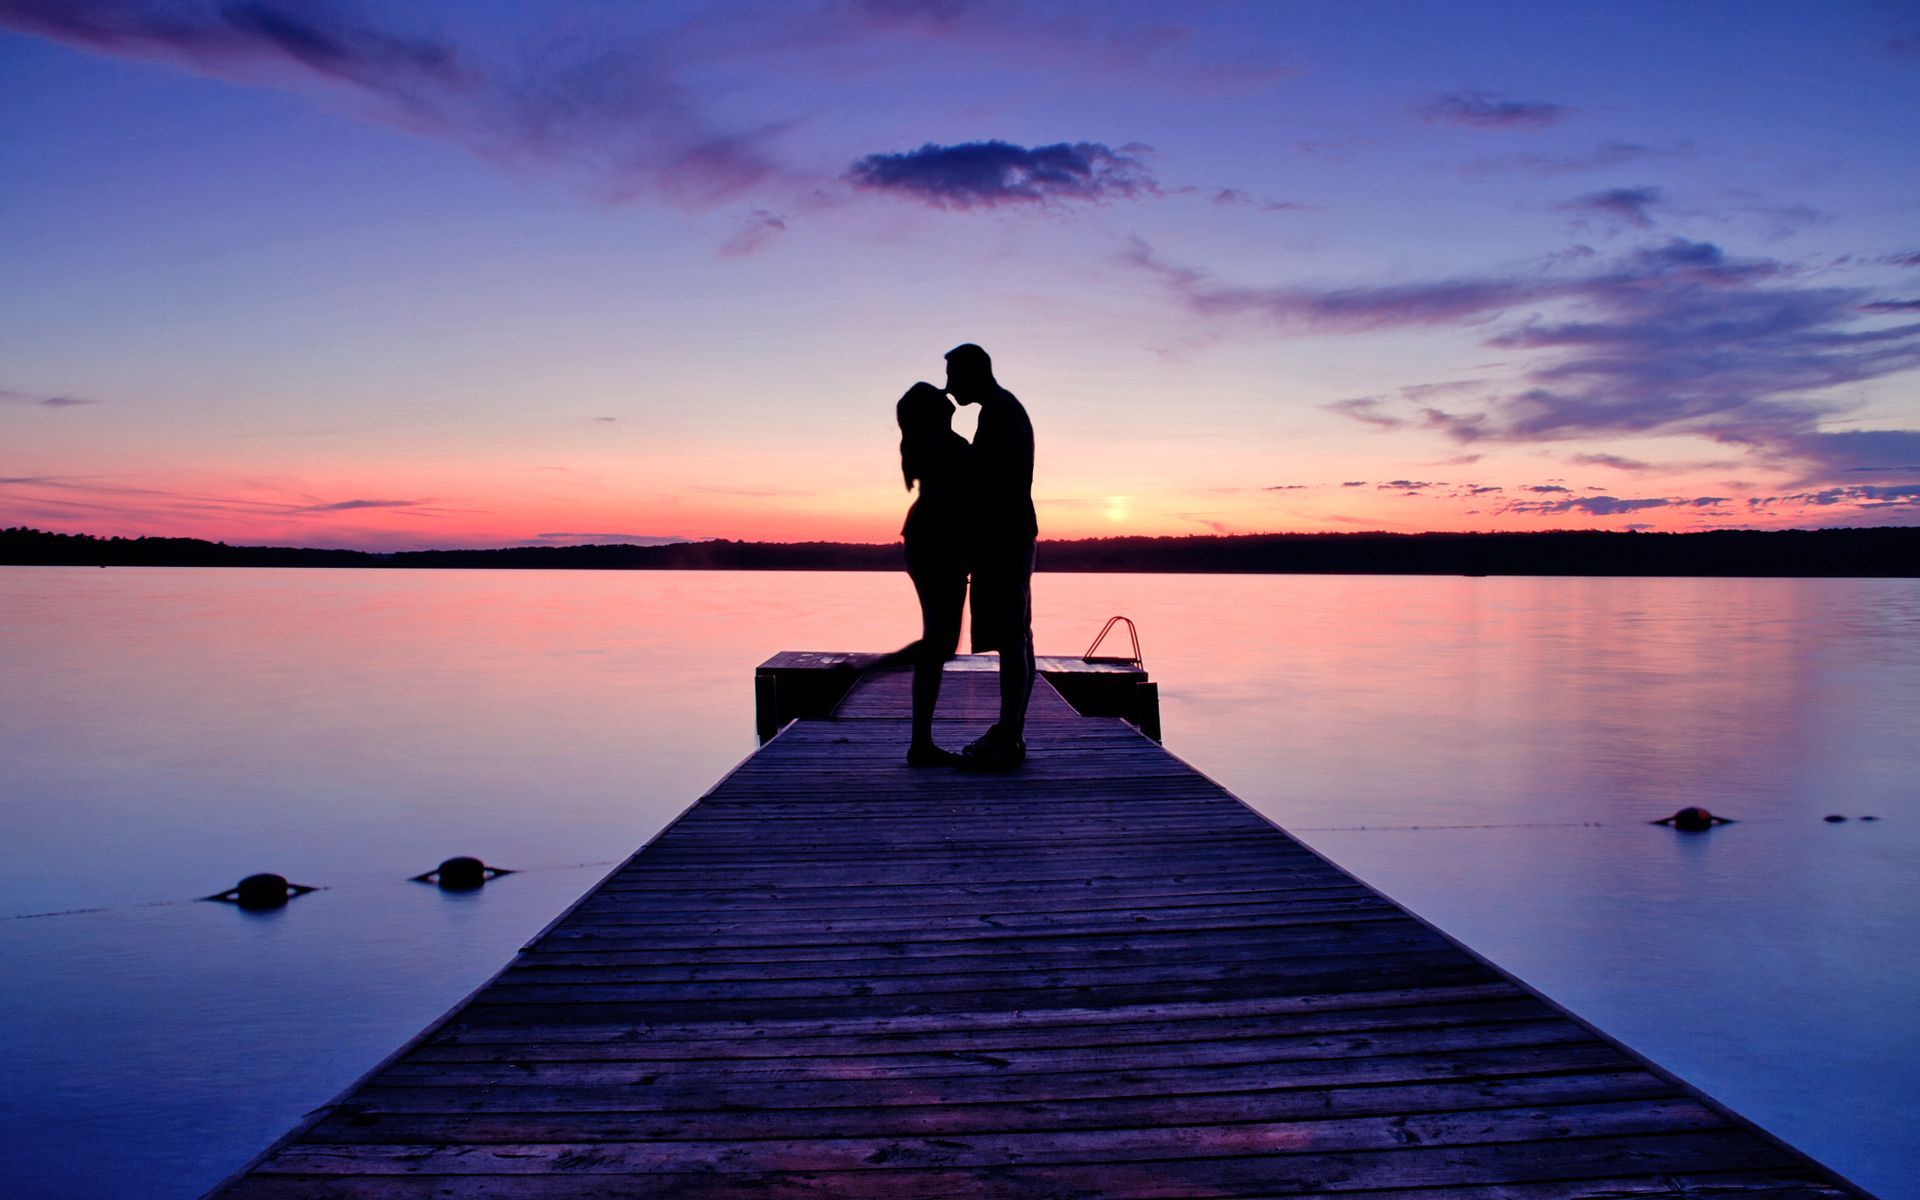 Cute Couple In Sunset Wallpapers 4k Hd Cute Couple In Sunset Backgrounds On Wallpaperbat 